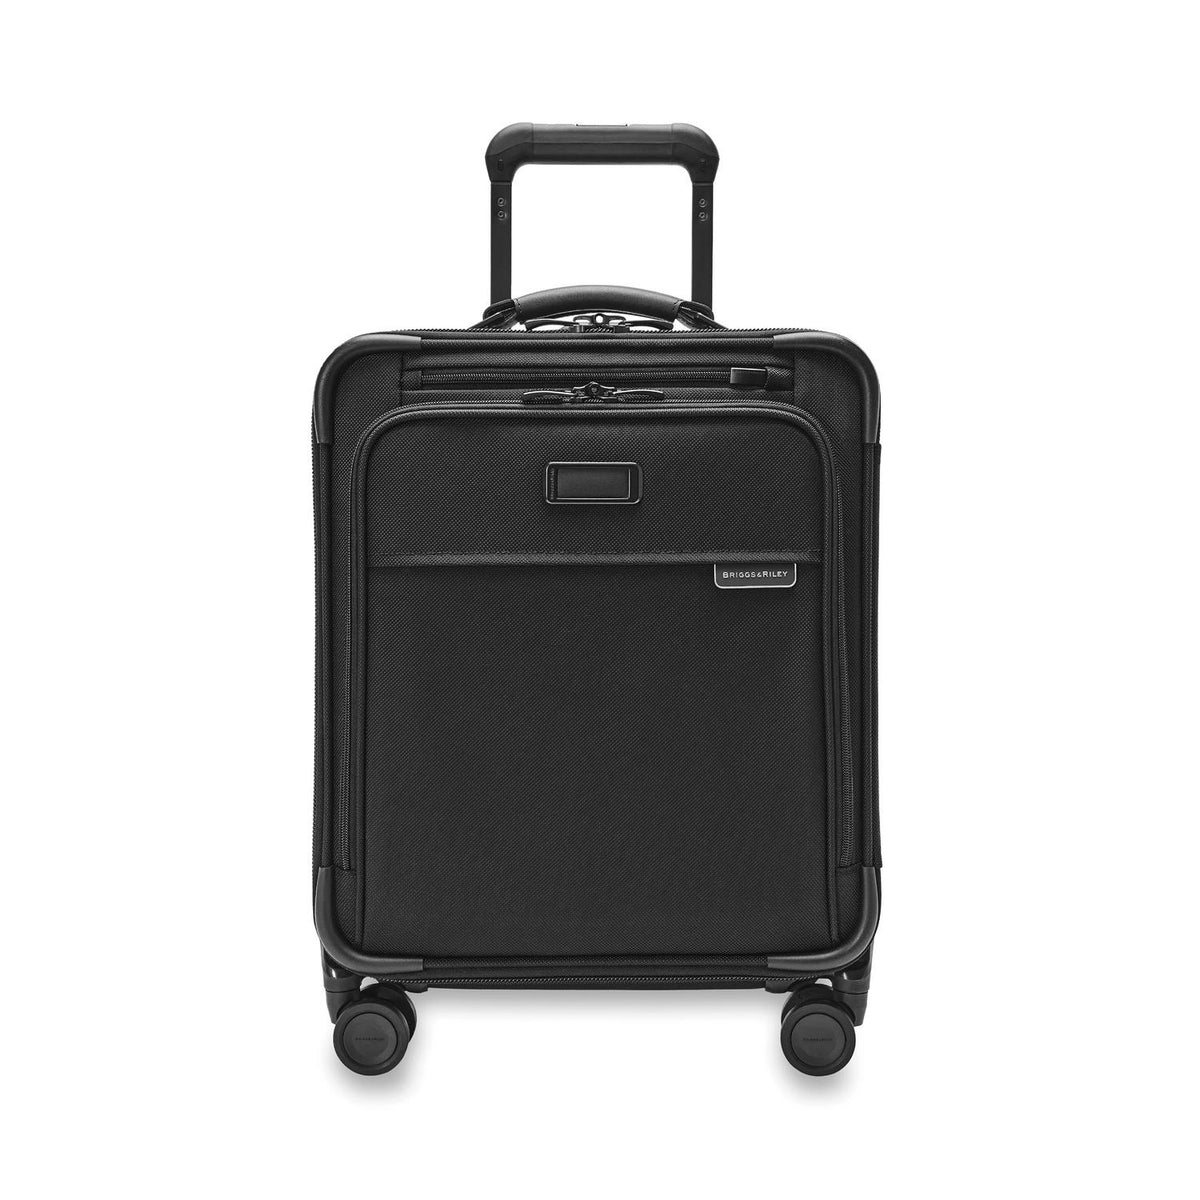 High-End Durable & Expandable Luggage | Briggs & Riley